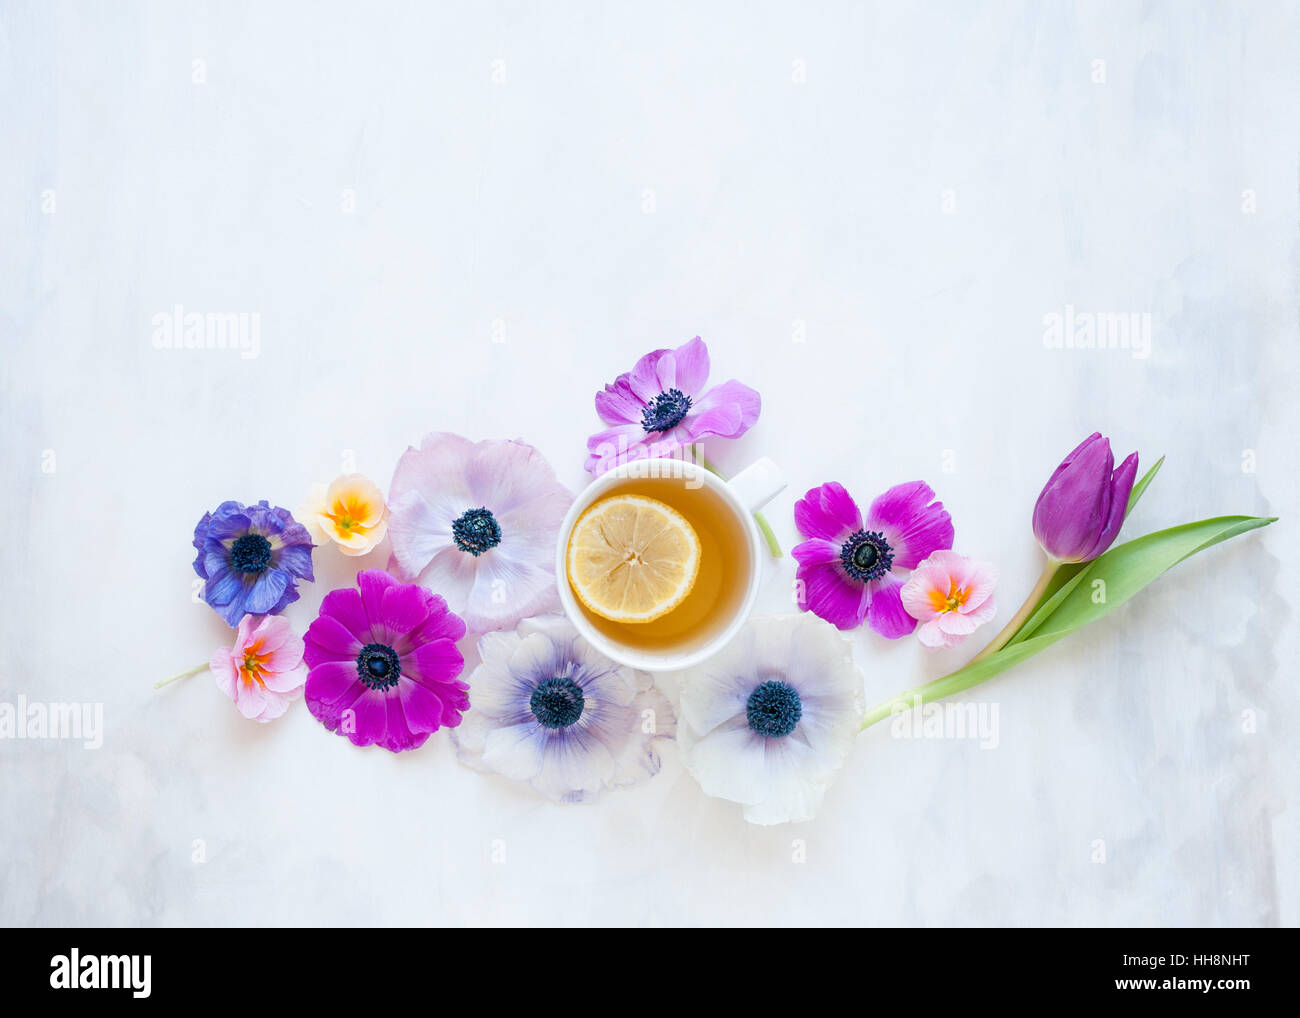 flat lay with spring flowers laid out on white and gray painted backdrop in natural light Stock Photo